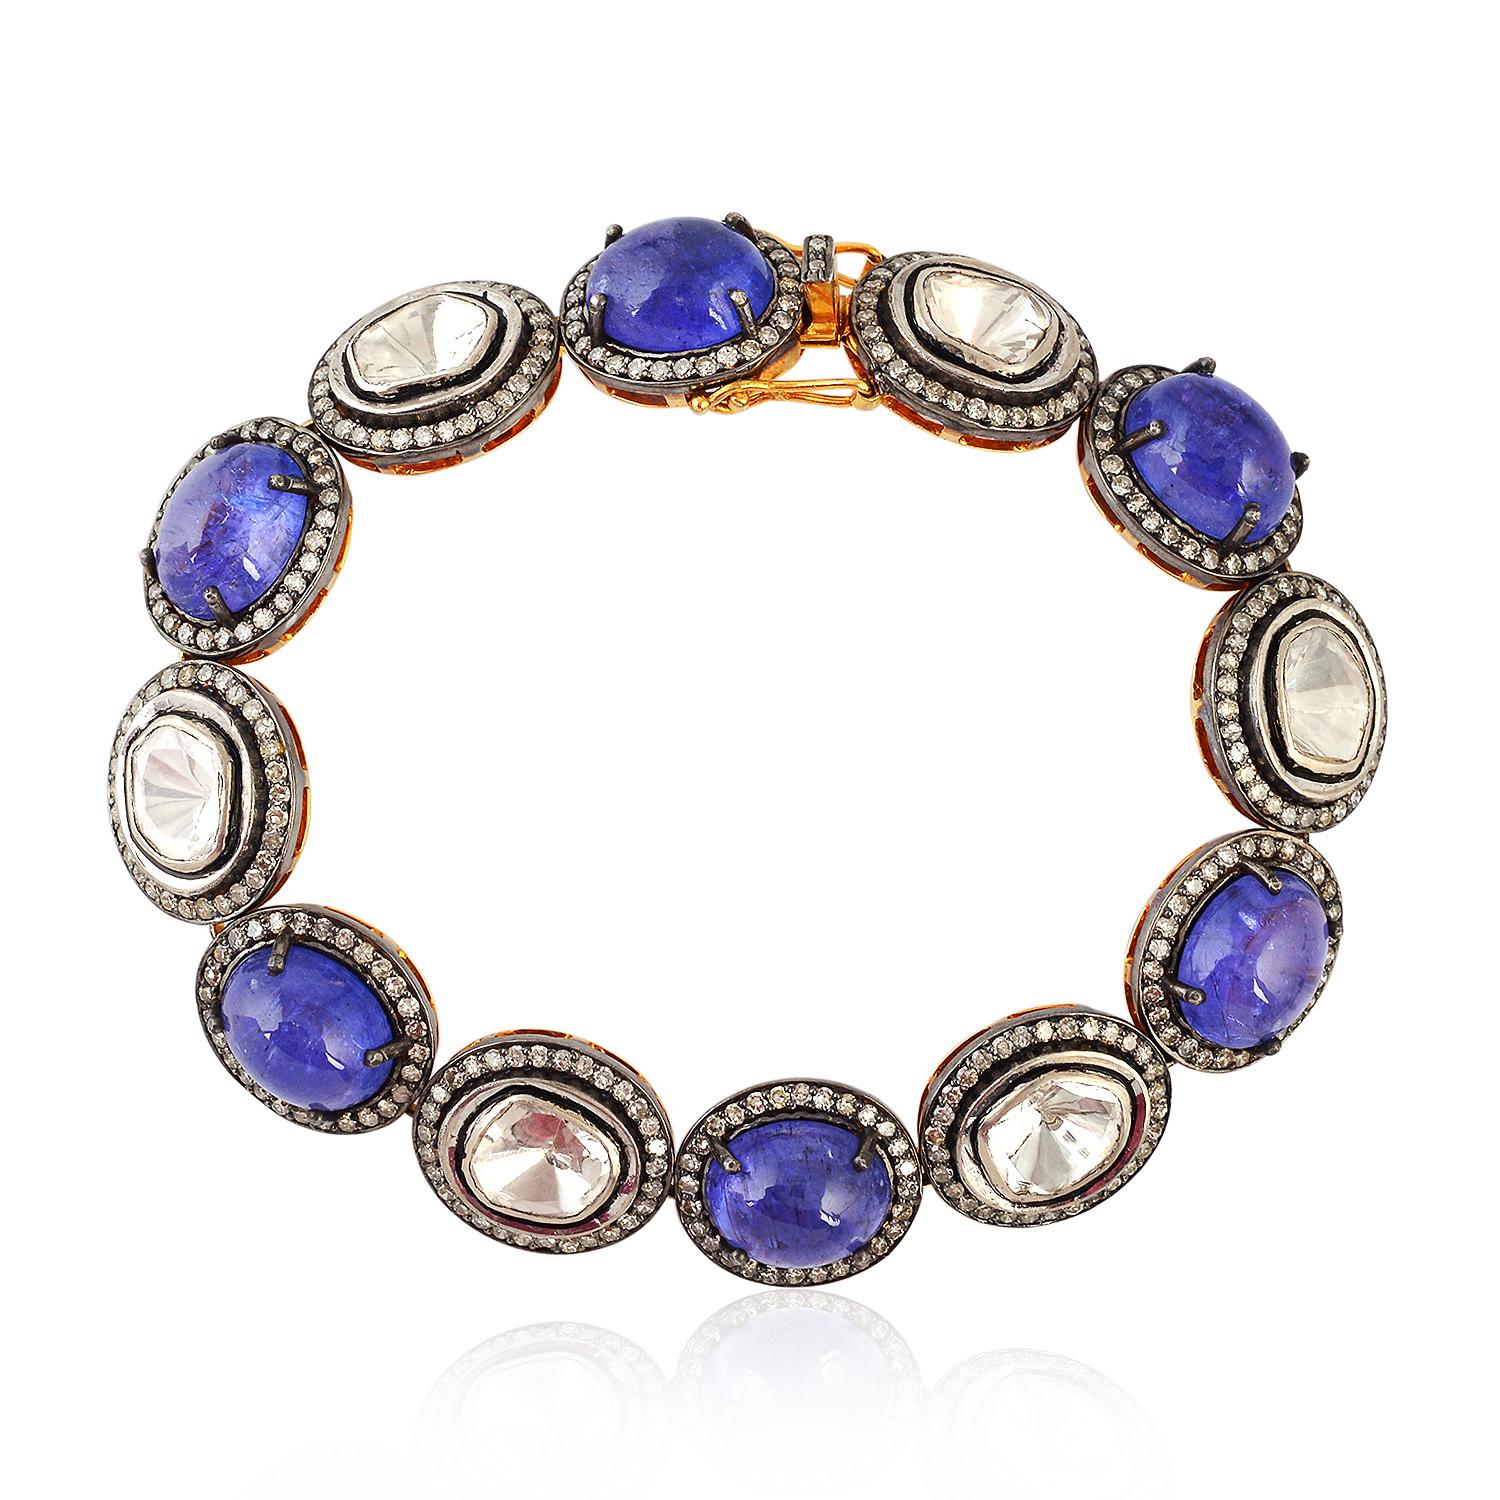 Mixed Cut Tanzanite and Rose Cut Diamond Bracelet With Pave Diamonds In 14k Gold & Silver For Sale